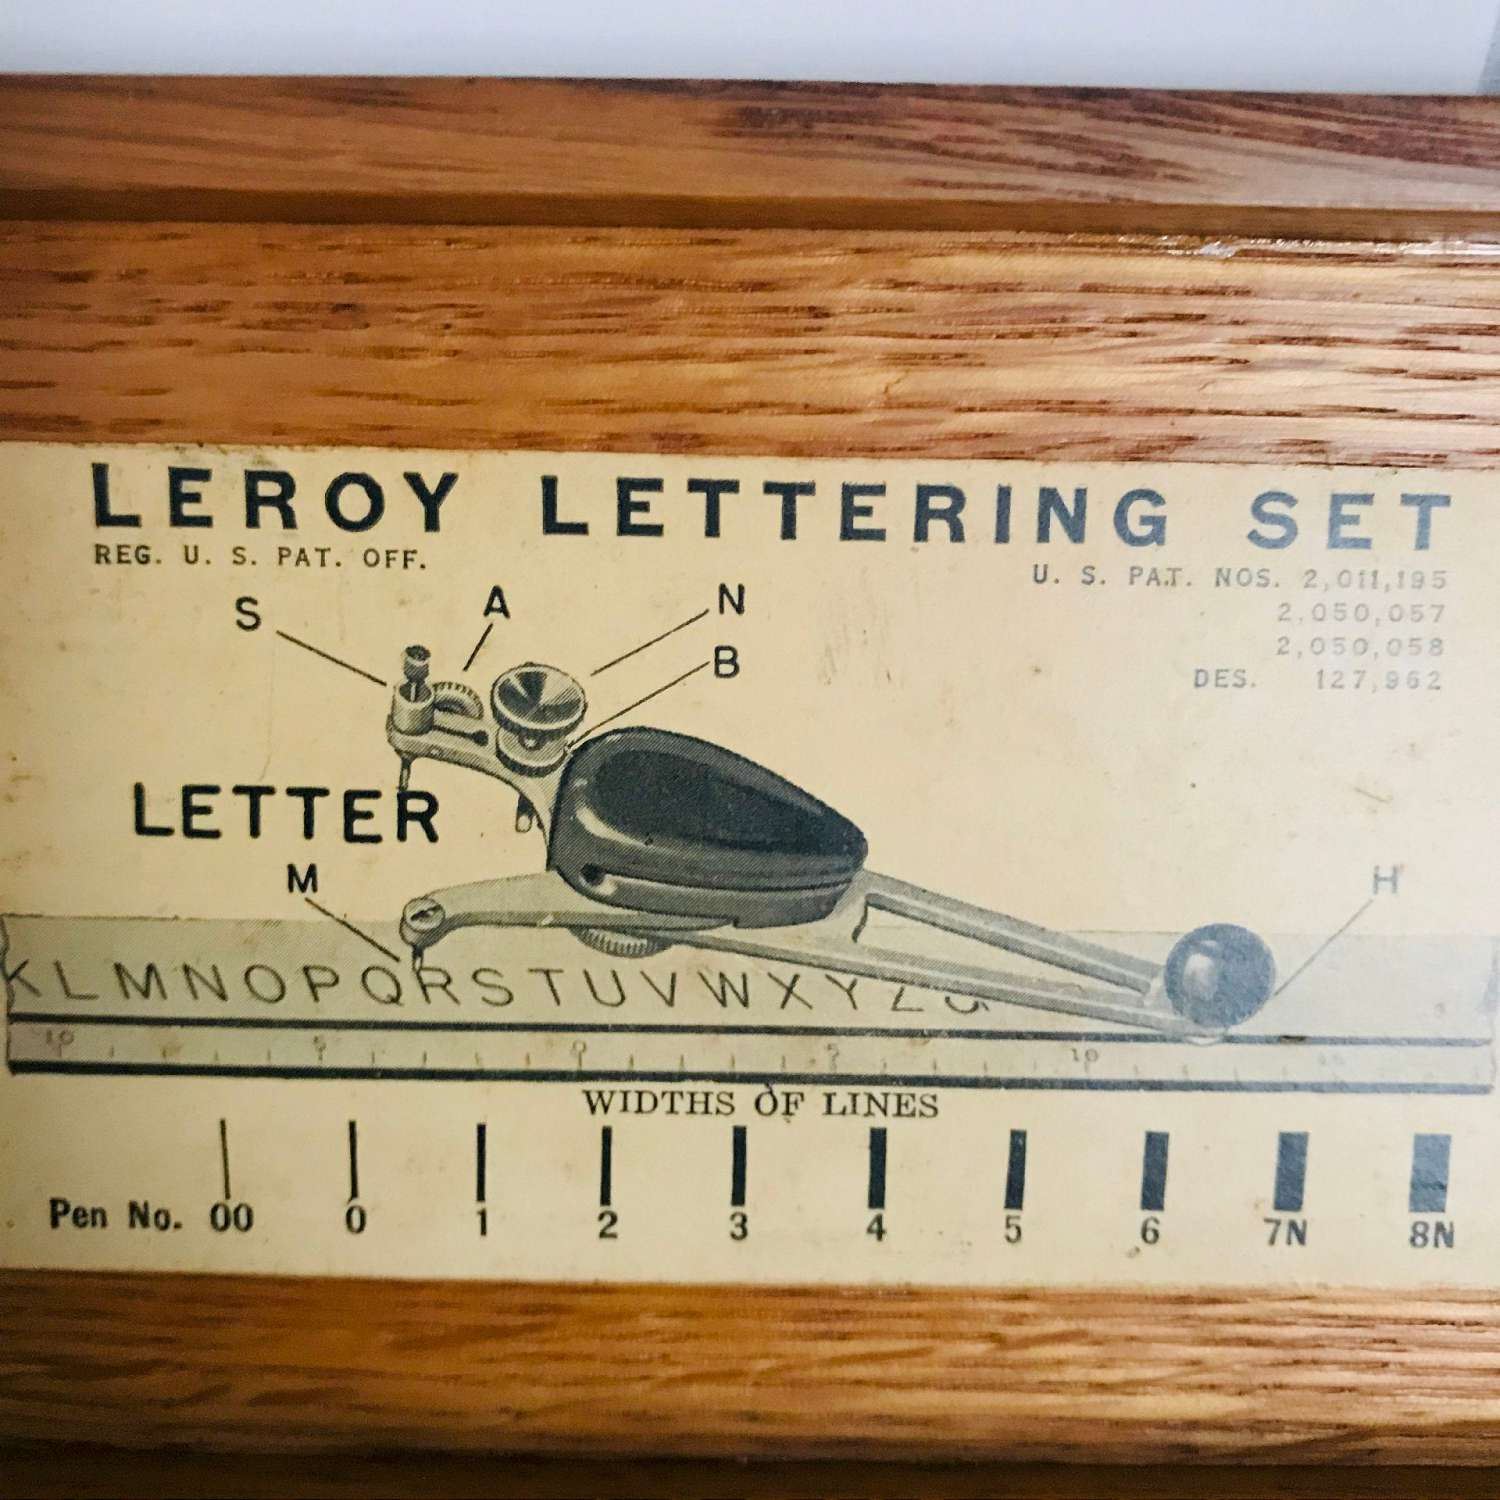 Vintage Lettering Kit Leroy Lettering Set Keuffel & Esser New York 1944  template farmhouse office collectible display